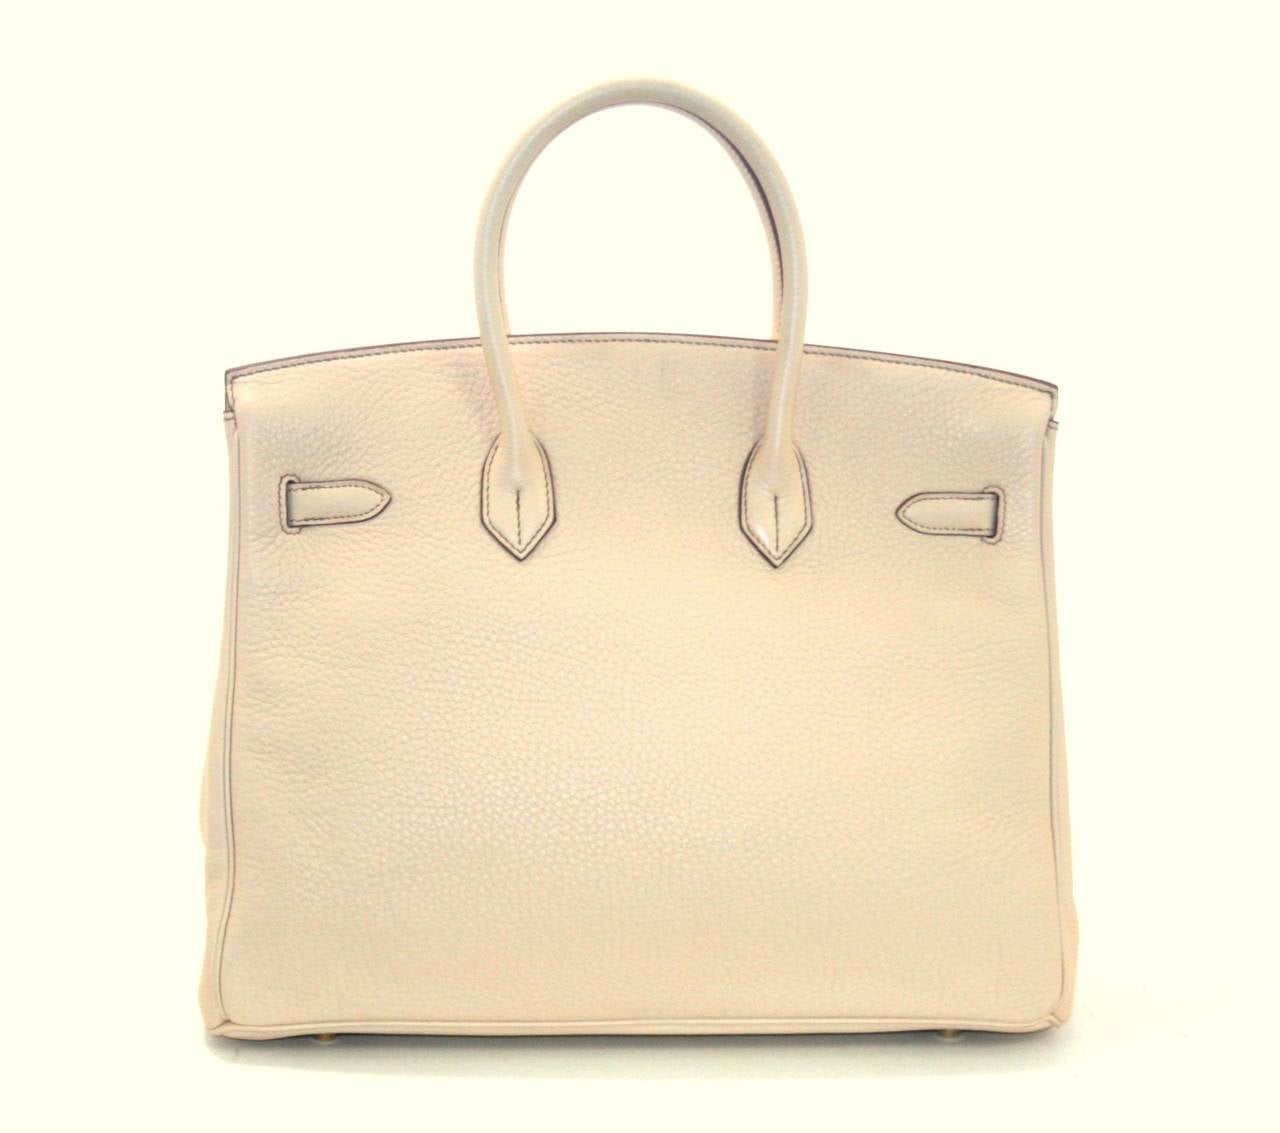 Herms Birkin Bag in Beige Clemence with Gold, 35 cm size at 1stdibs